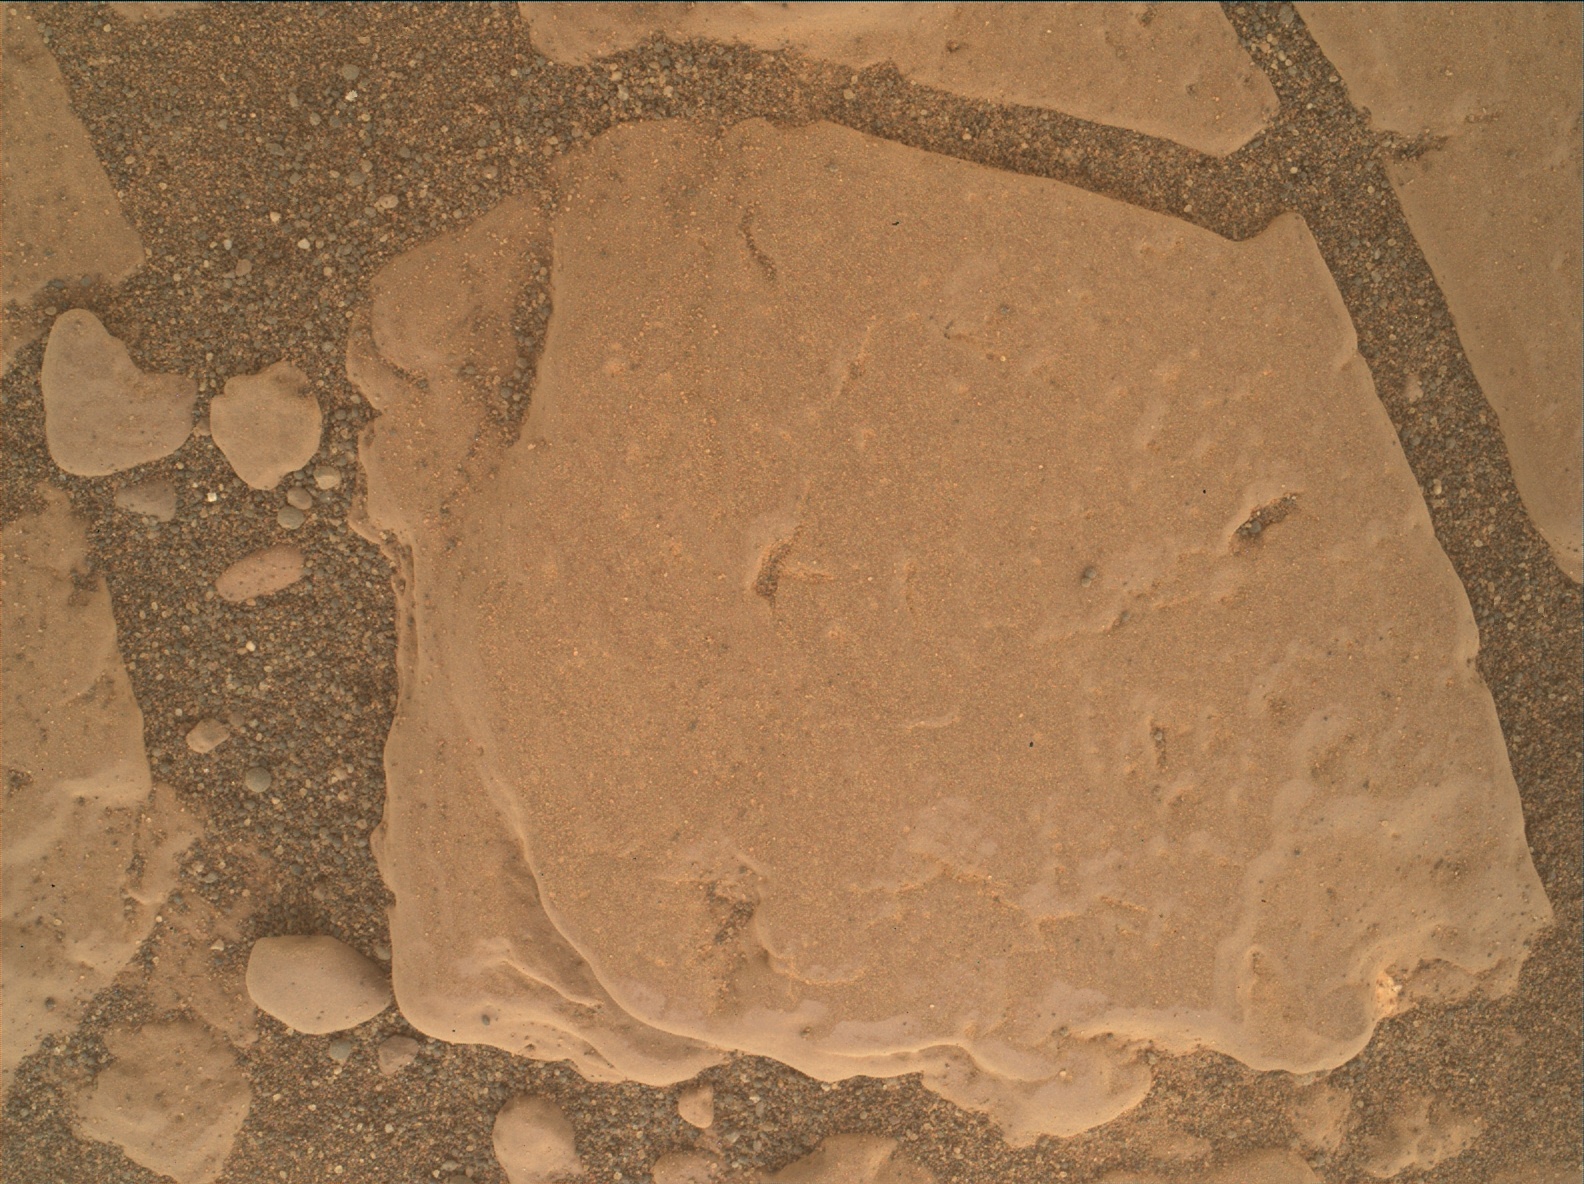 Nasa's Mars rover Curiosity acquired this image using its Mars Hand Lens Imager (MAHLI) on Sol 2361